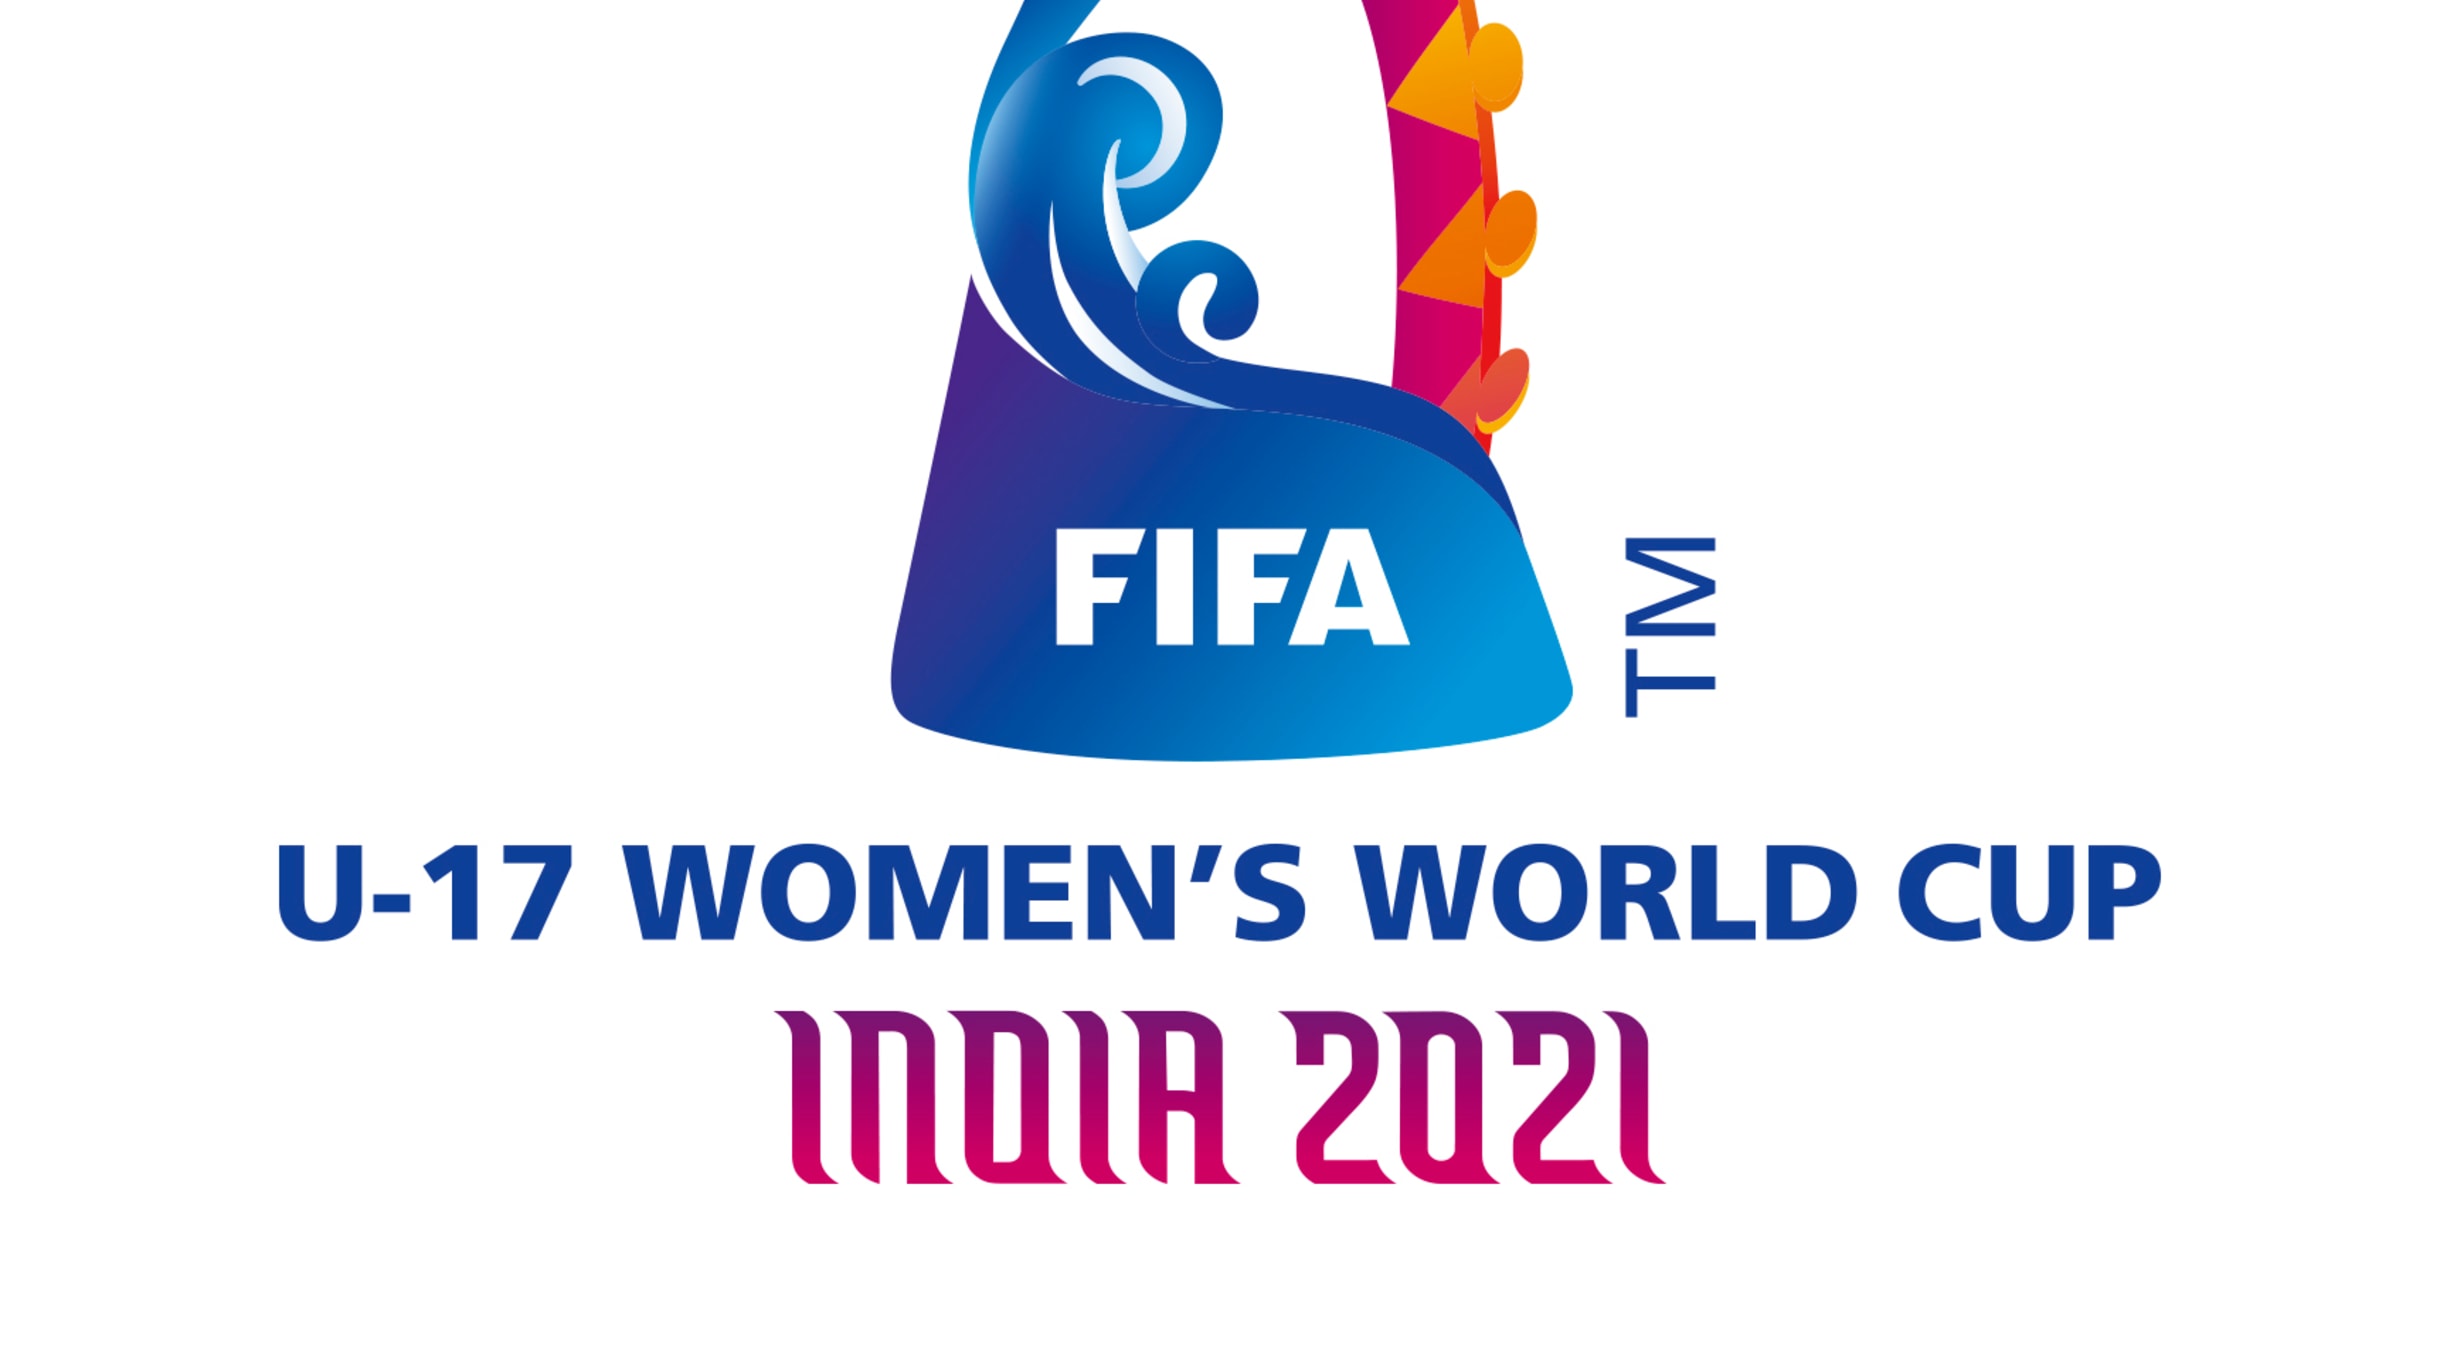 England, Spain and Germany qualify for U-17 Womens FIFA World Cup in India